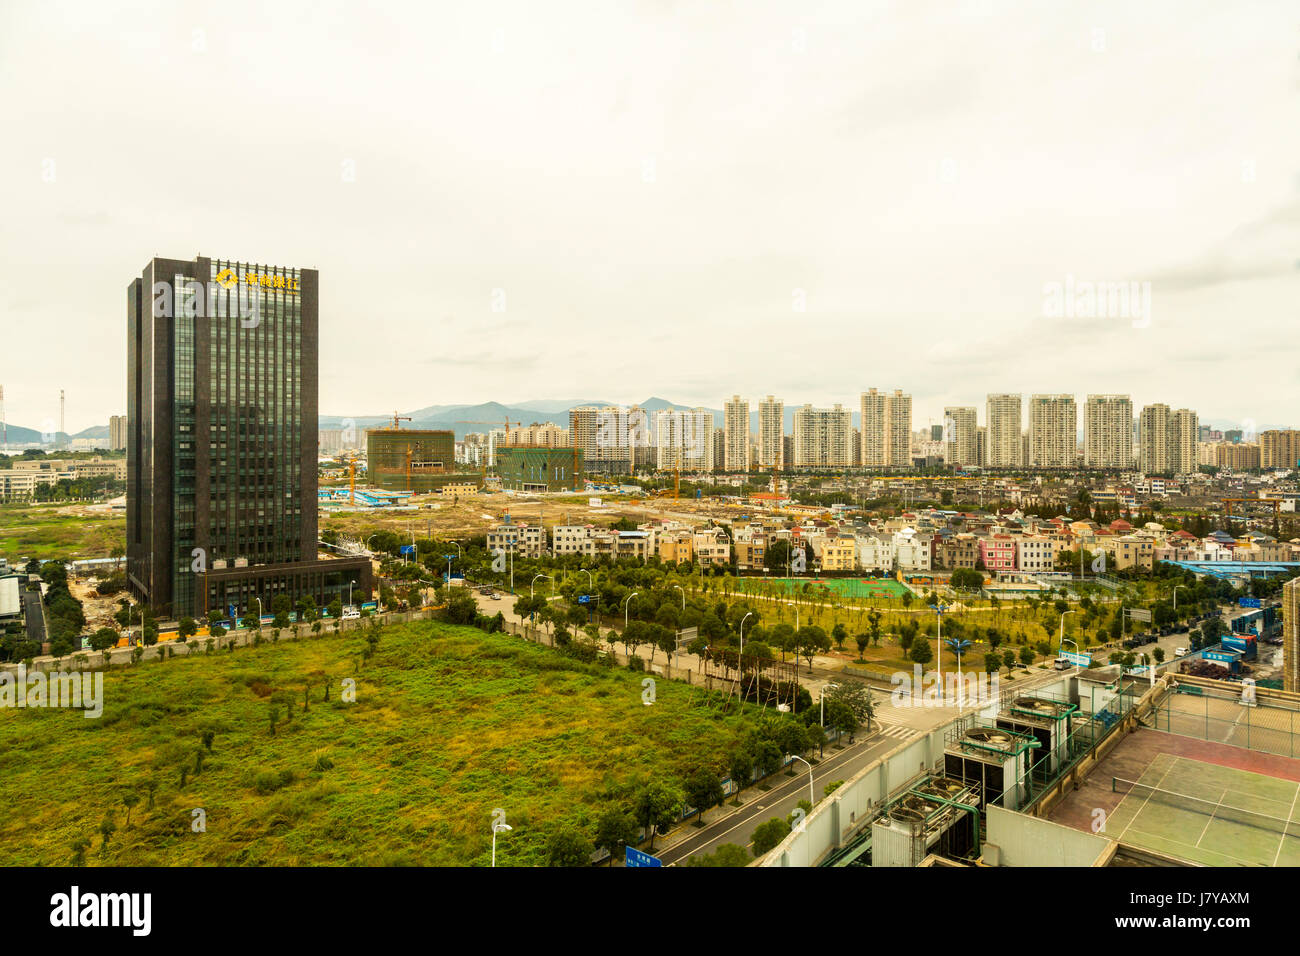 Wenzhou, Zhejiang, China.  Urban Growth.  New High-rise Buildings Replace Old Residences. Stock Photo